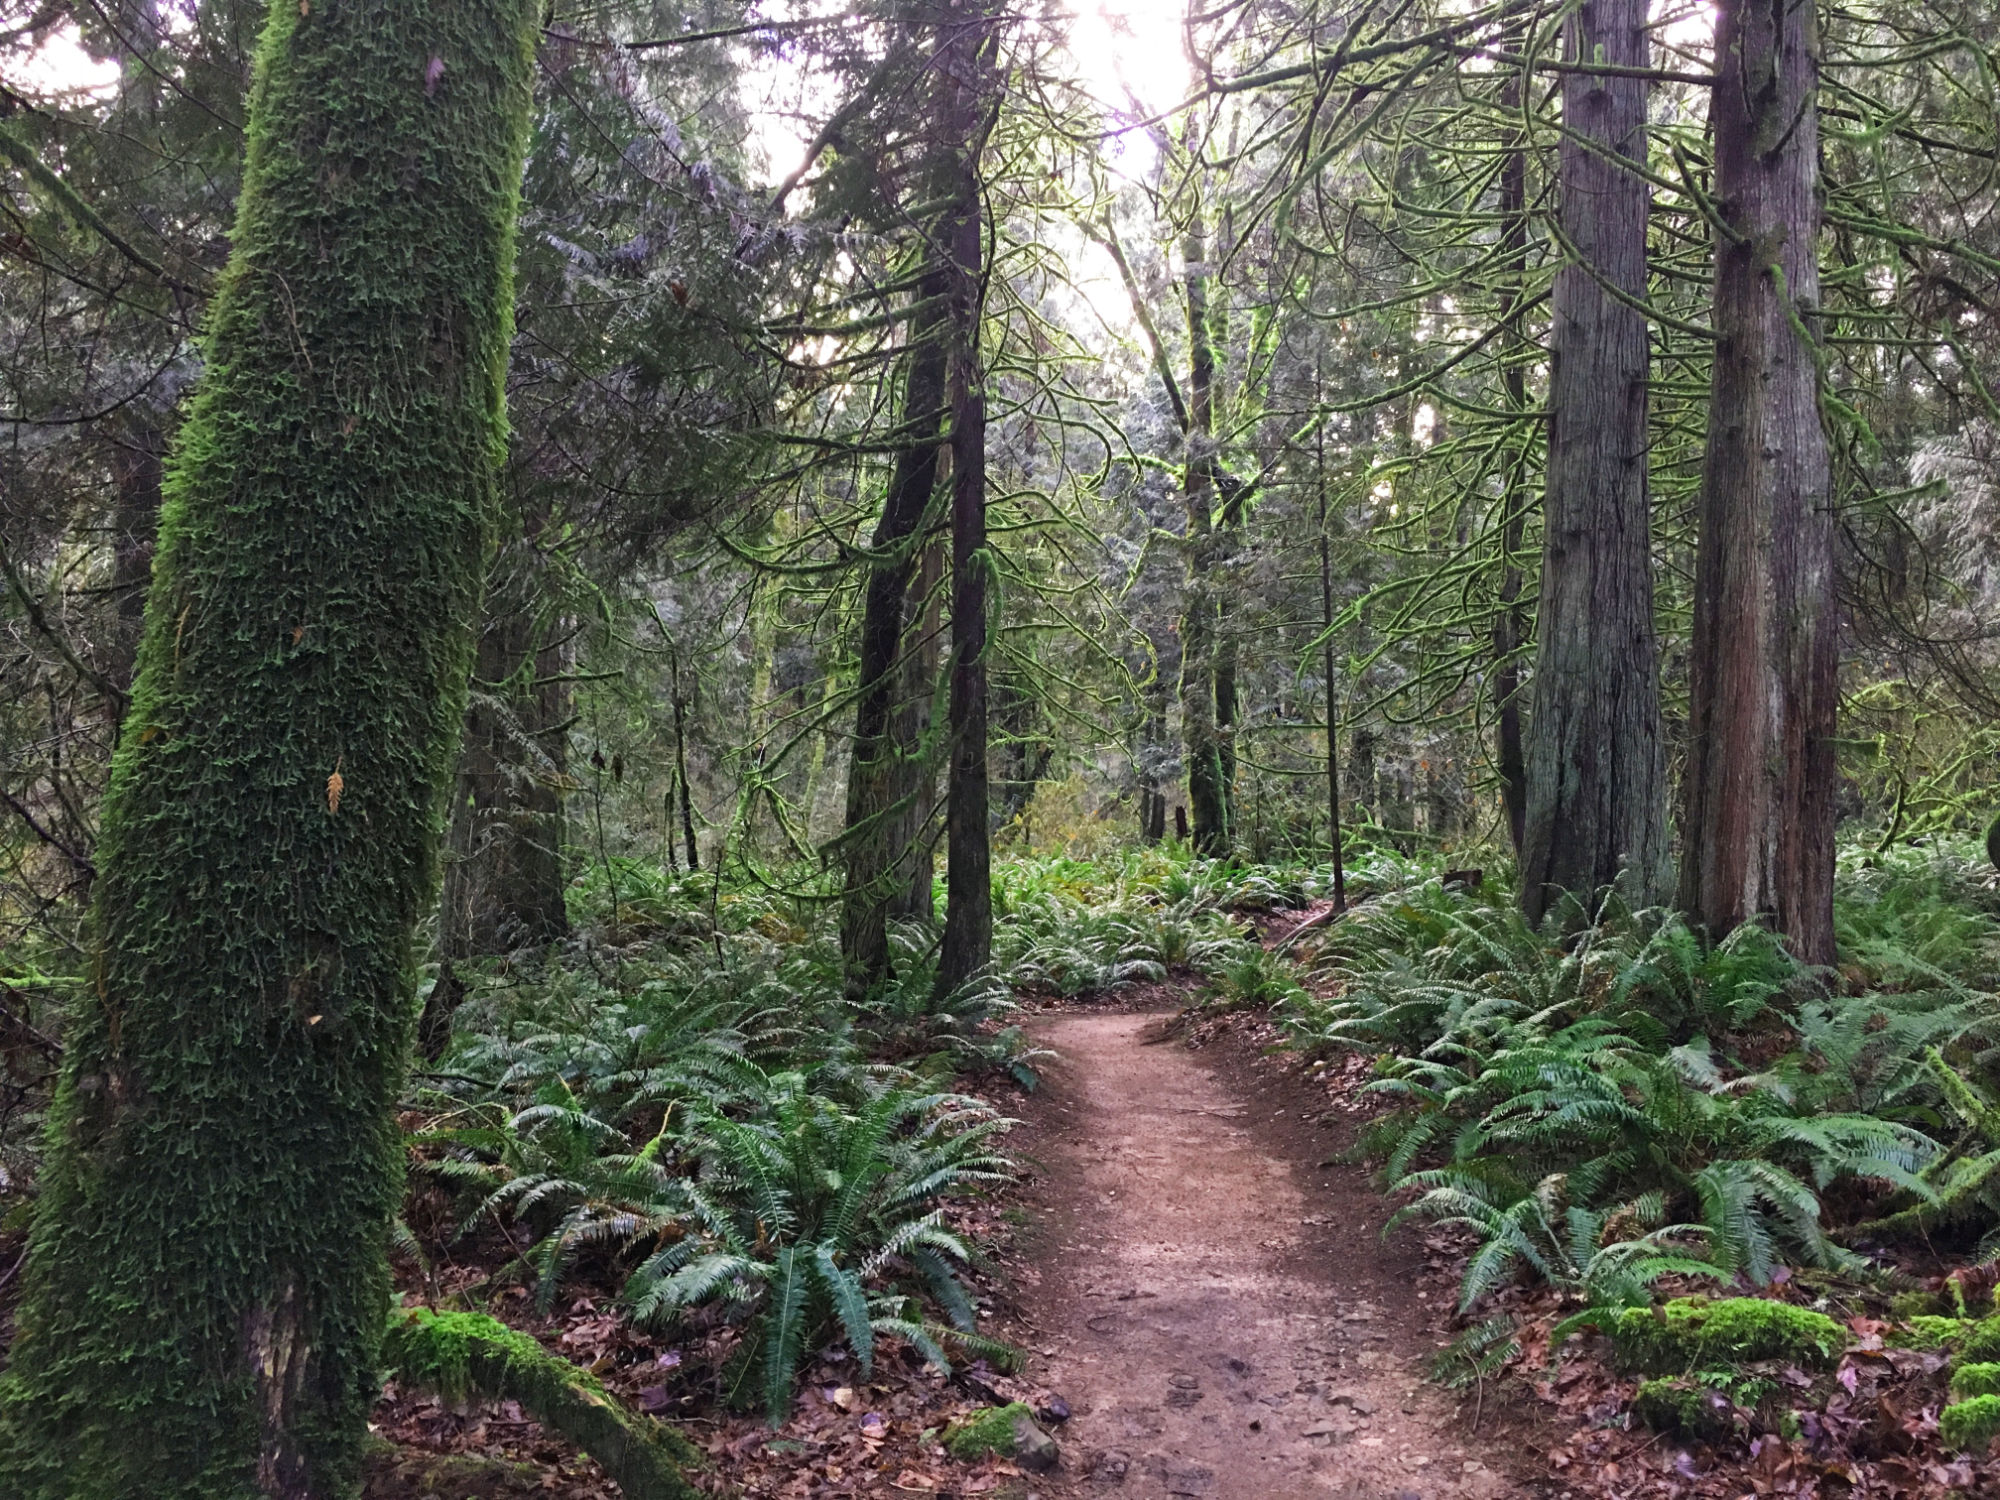 Dirt trail in Beaver Lake Park lined with ferns and moss-covered trees